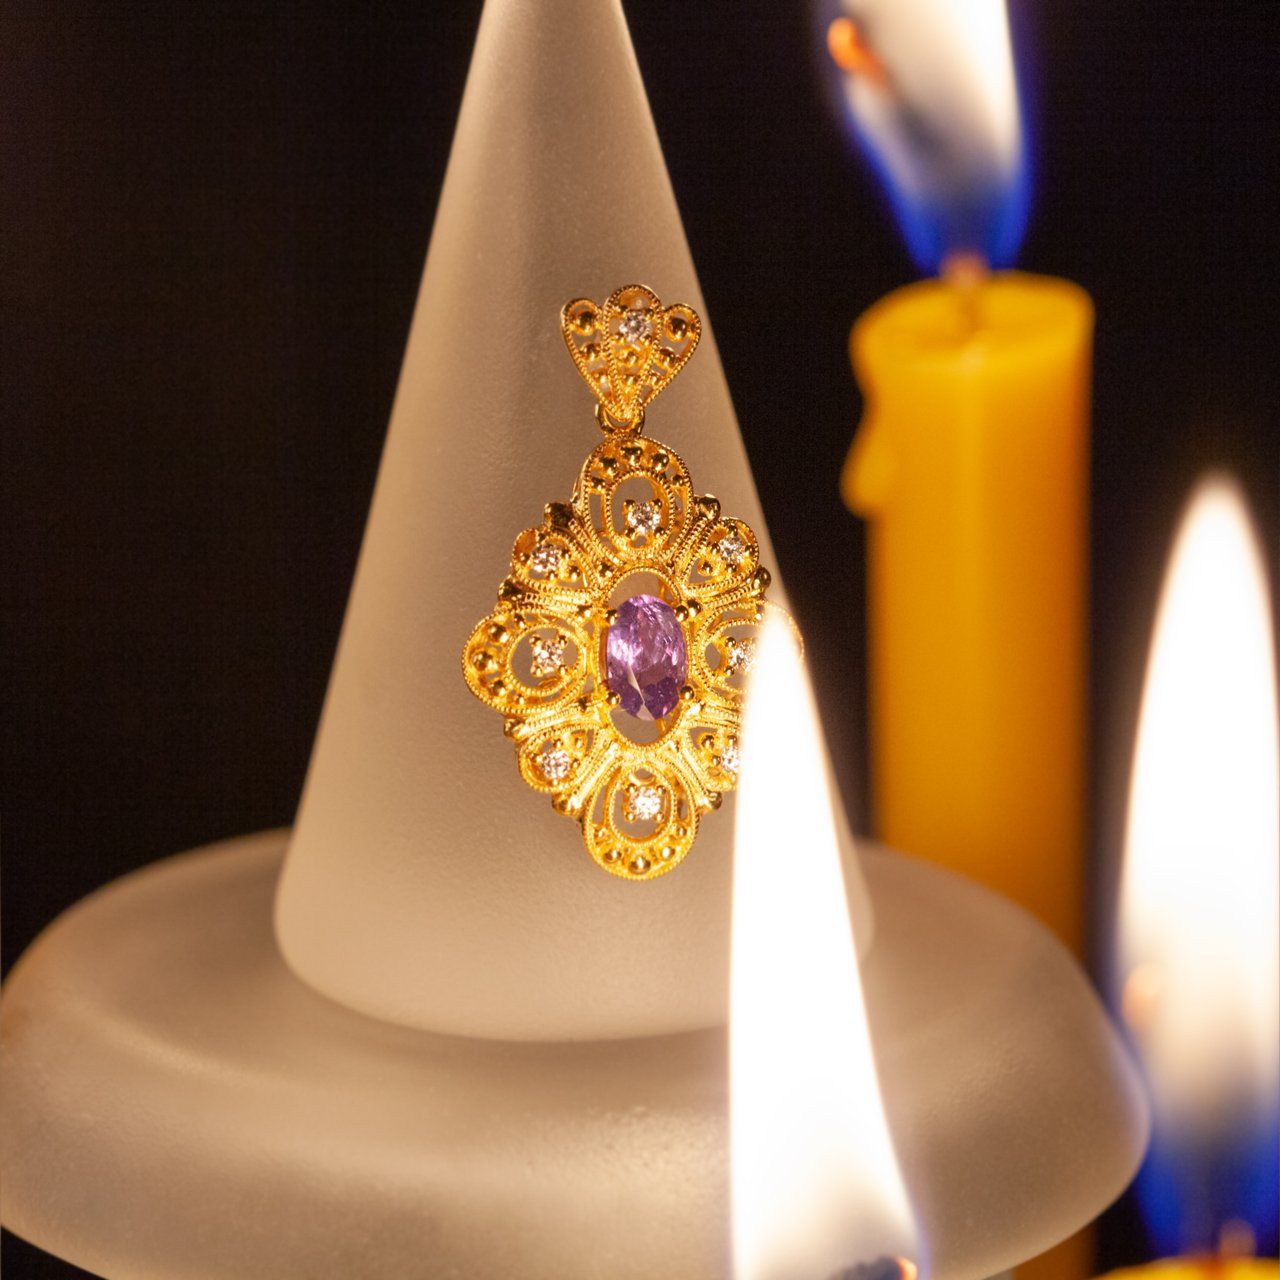 0.30ct alexandrite set in an 18k yellow gold pendant displayed on a candle